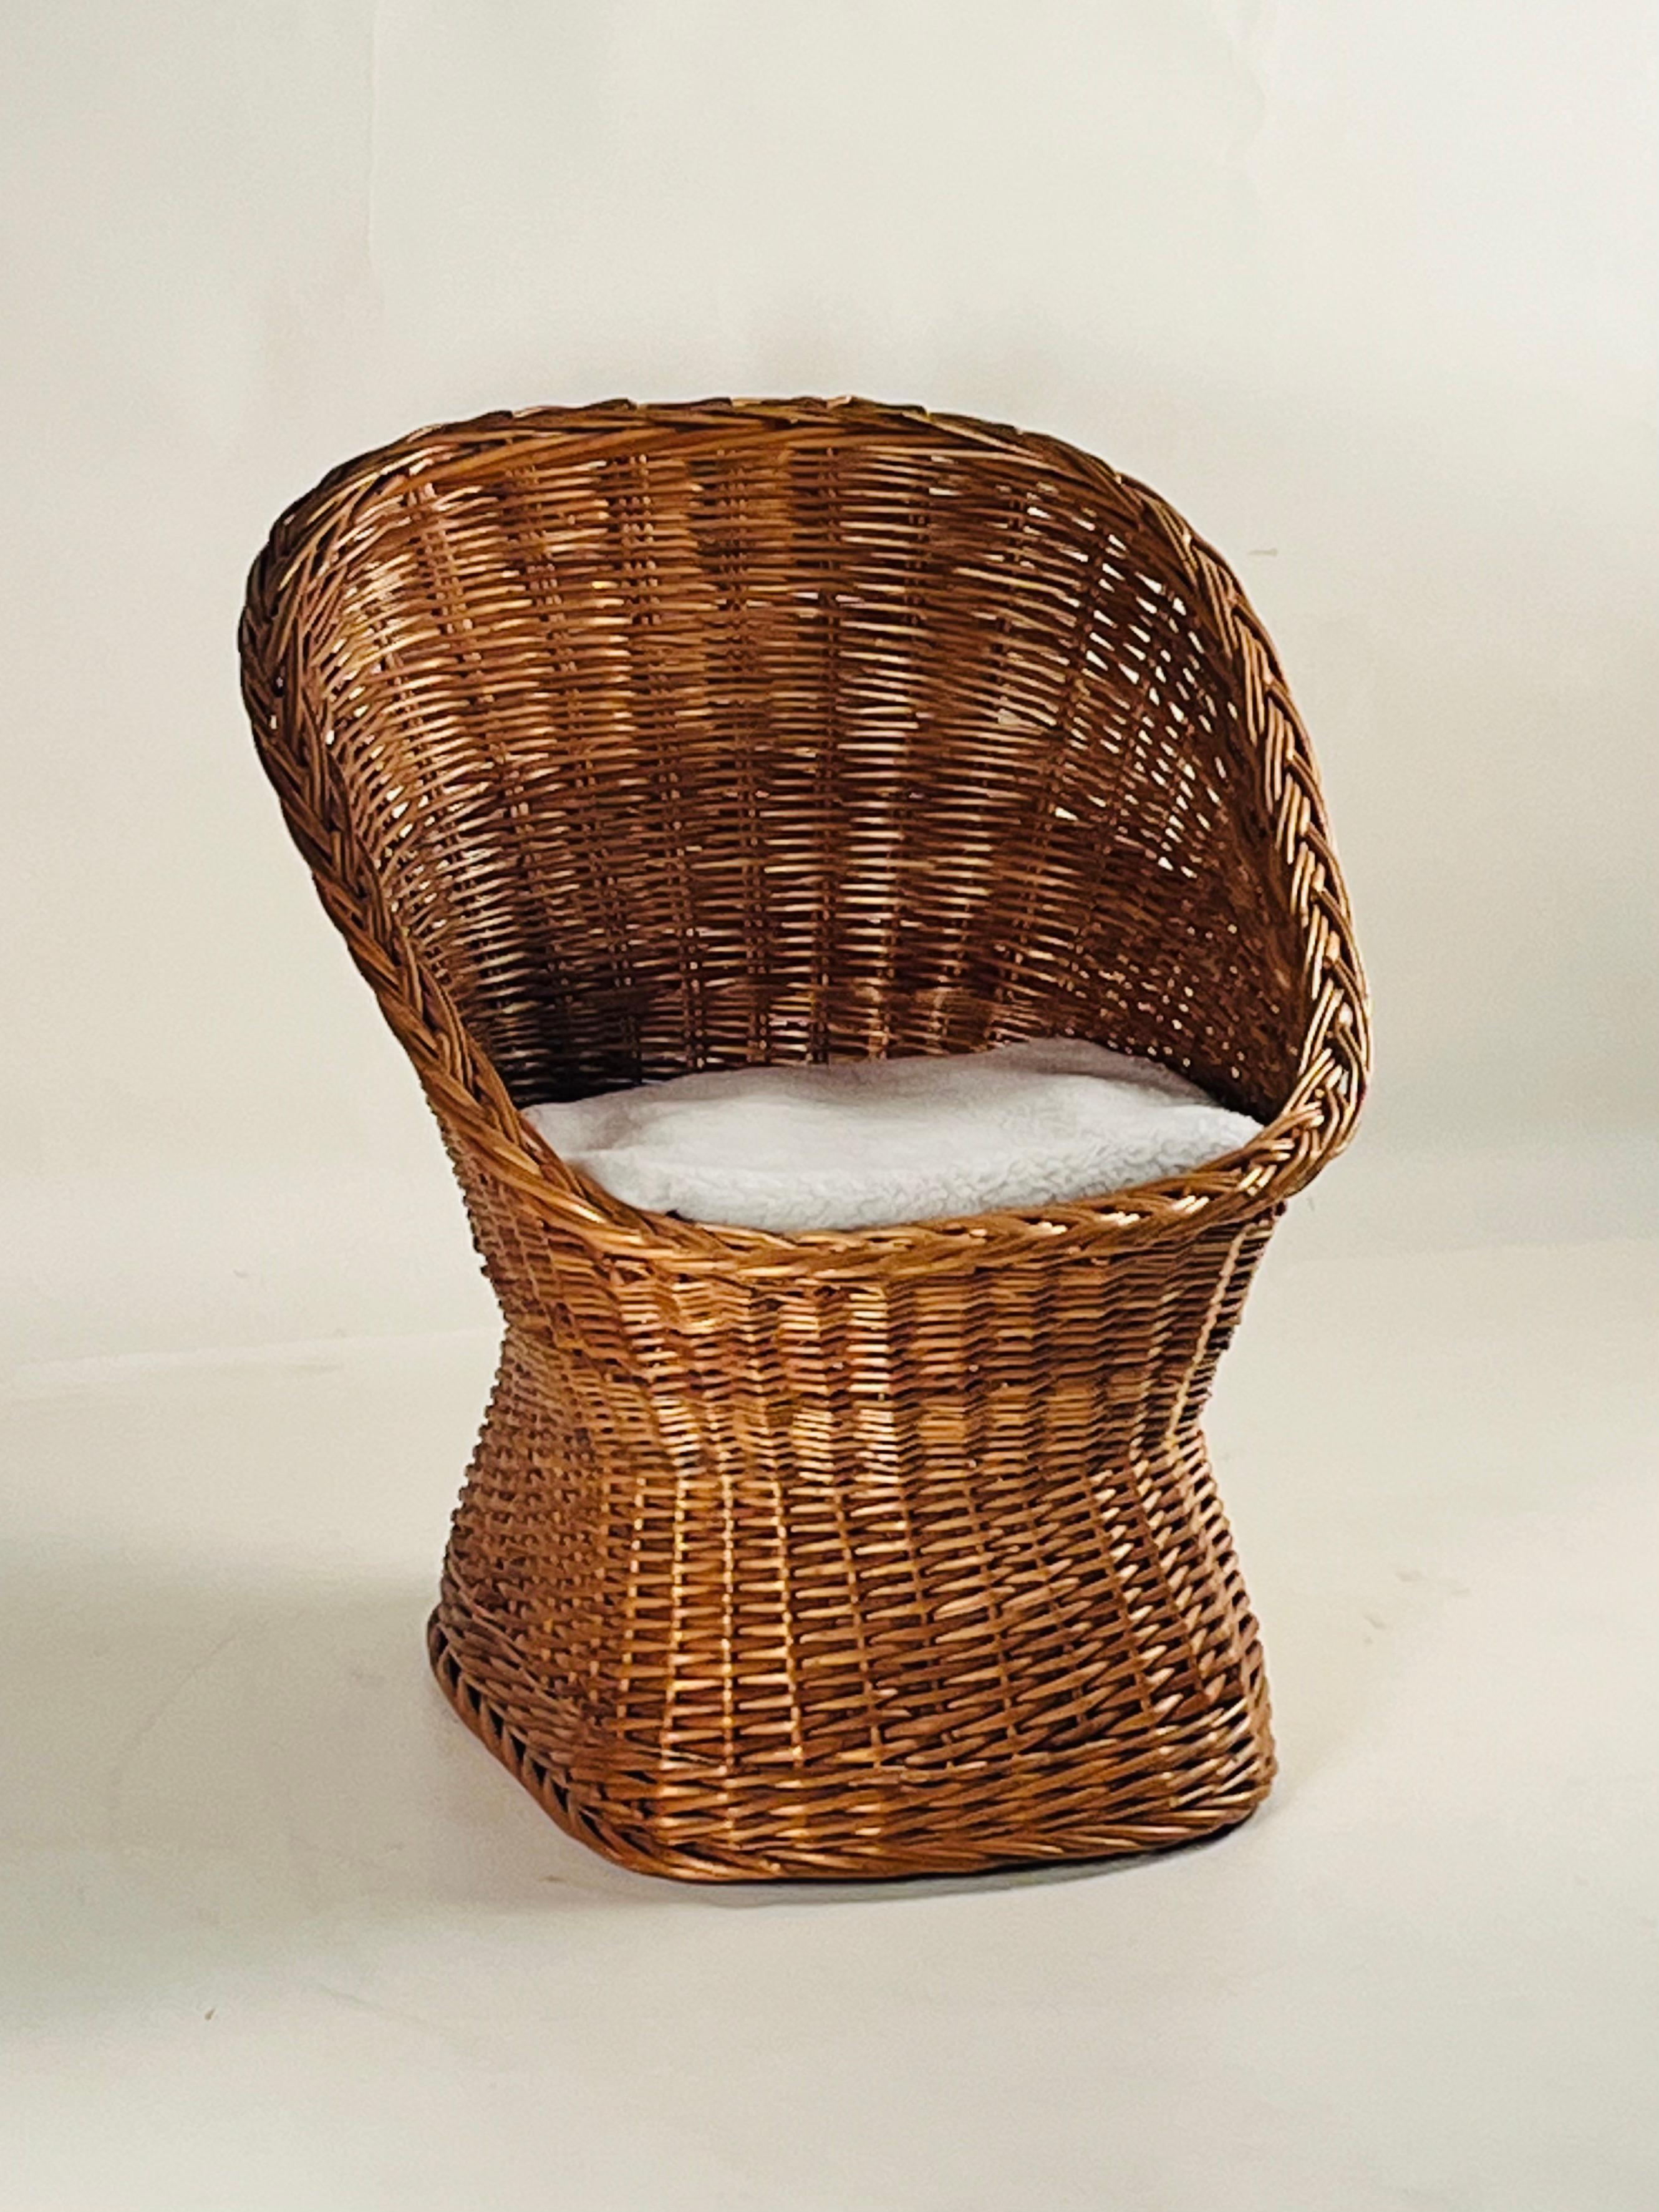 Woven Rattan Wicker Barrel Chair with Shearling Pad For Sale 6